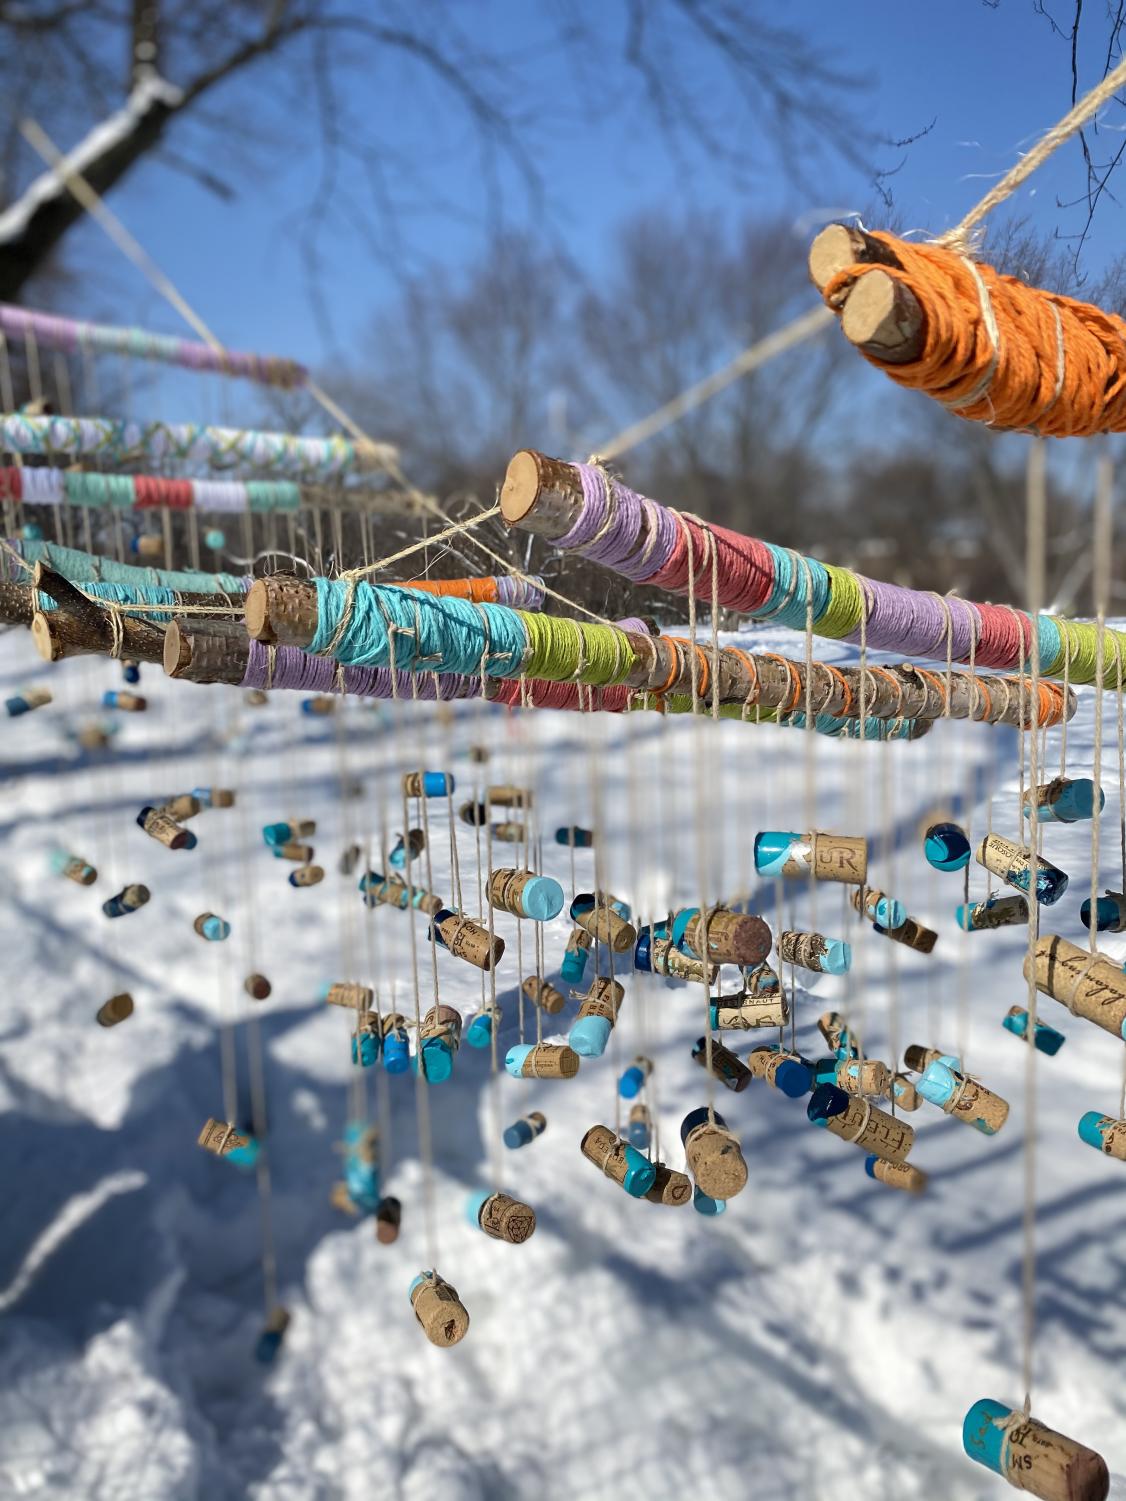 Sticks+wrapped+in+colorful+yarn+are+tied+together+with+blue-dipped+corks+hanging+beneath+them+on+strings.+There+is+snow+in+the+background.